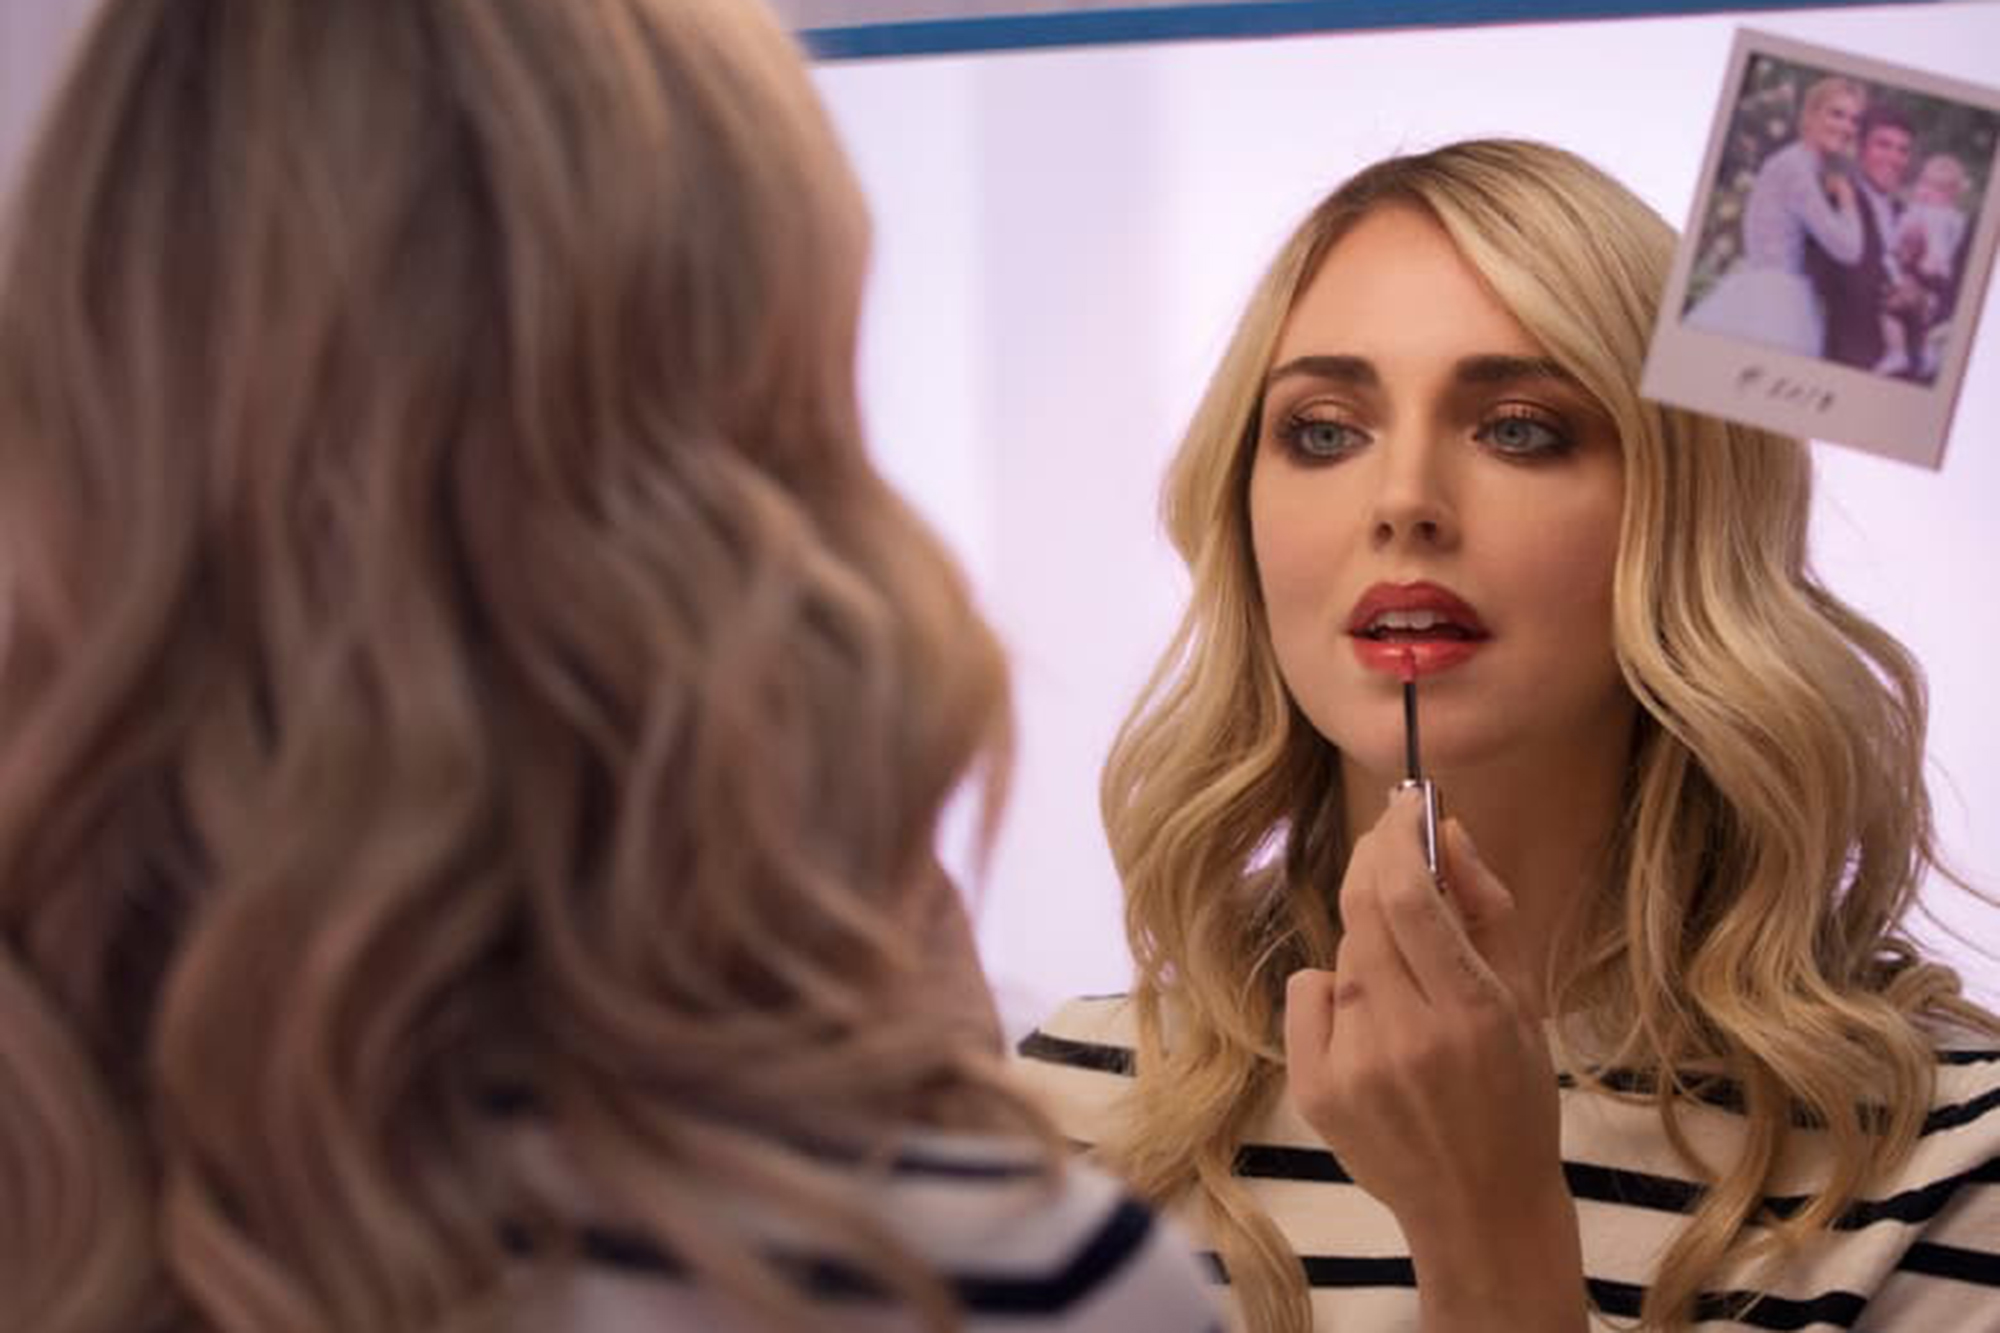 Every makeup product that influencer Chiara Ferragni wore on her